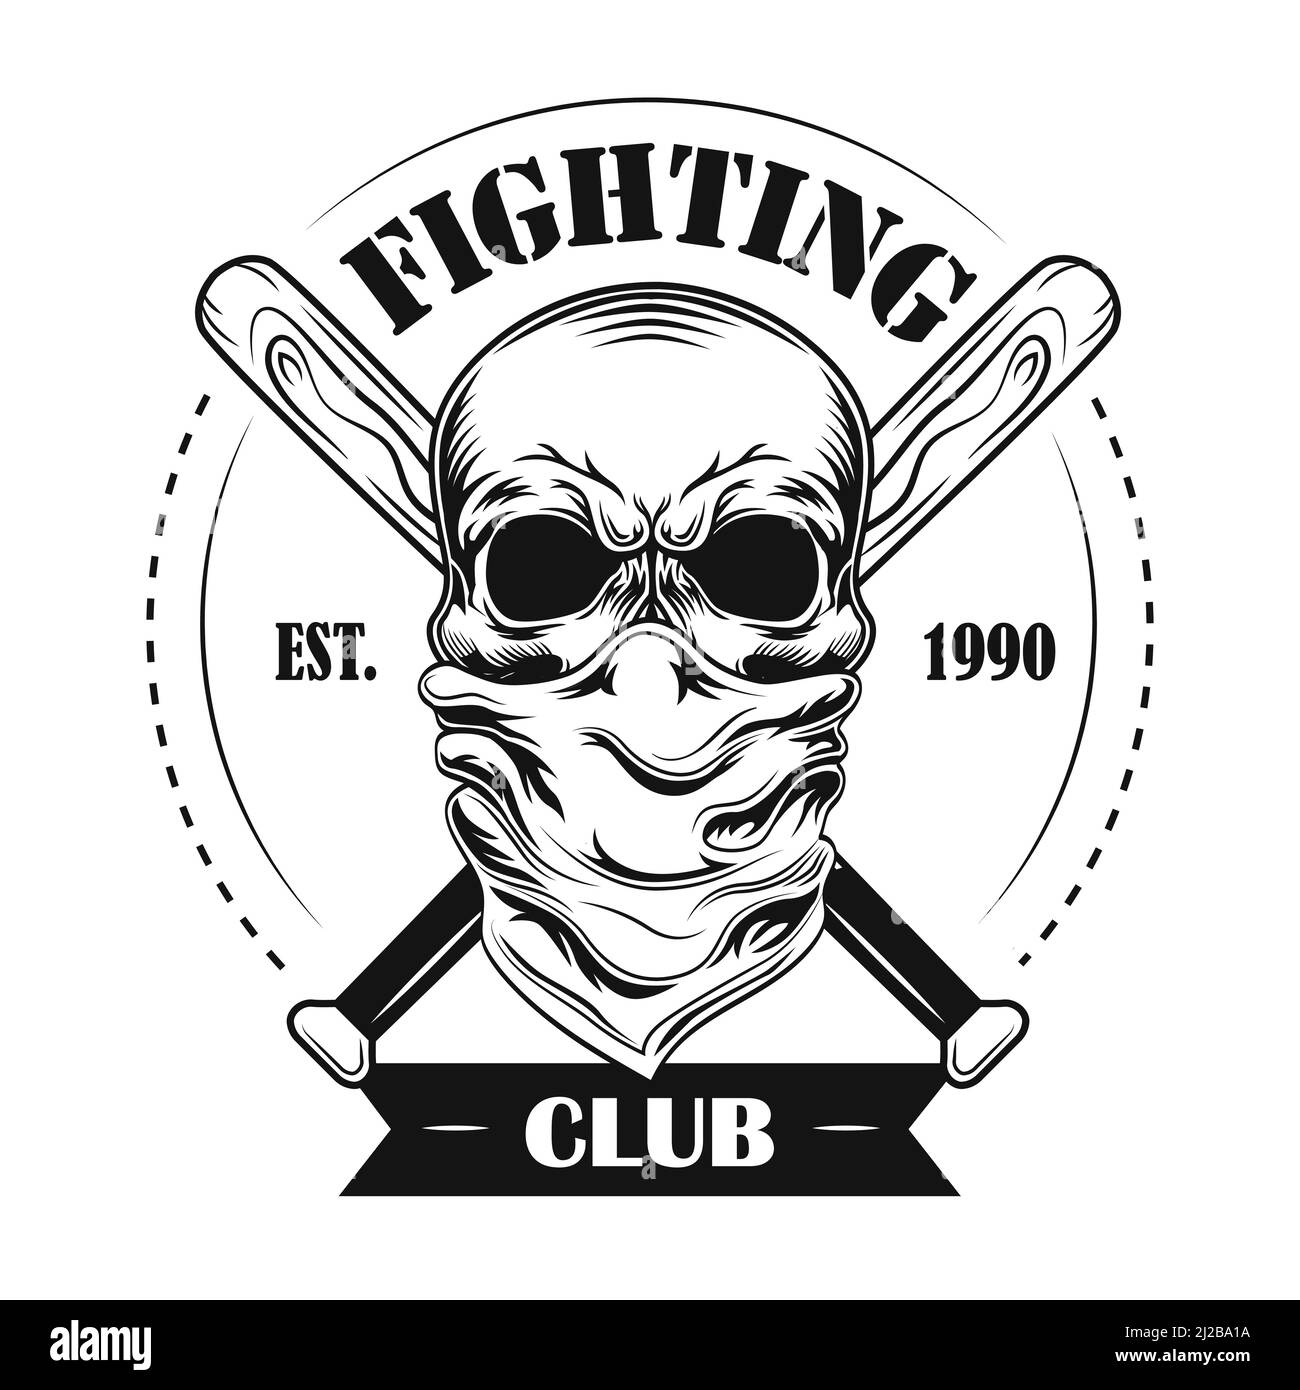 Fighting club member vector illustration. Skull in bandana, crossed baseball bats and text. Fight club concept for community emblems or badges templat Stock Vector